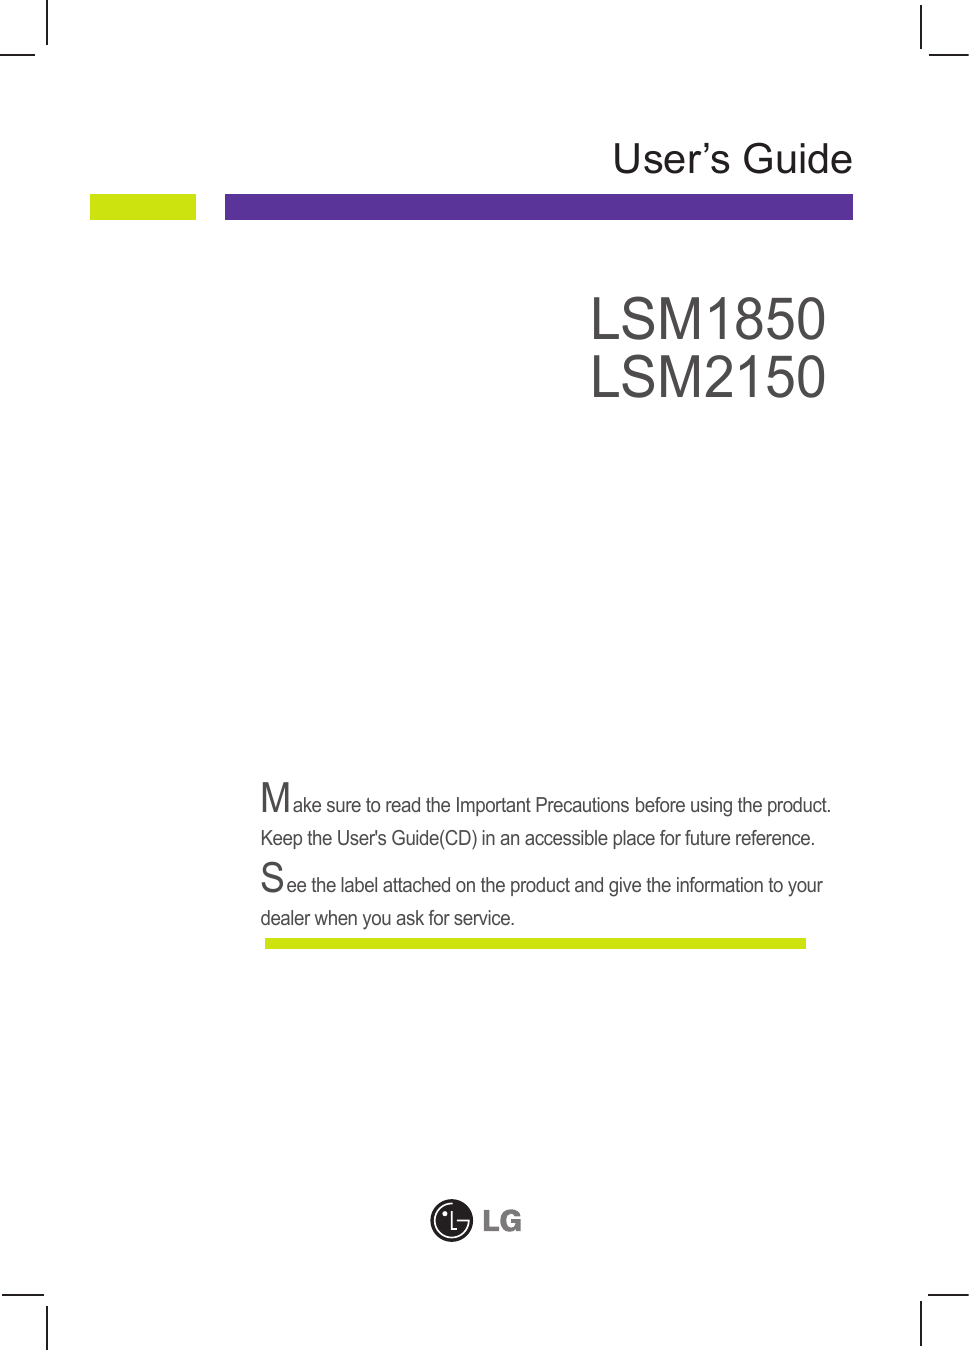 Make sure to read the Important Precautions before using the product.  Keep the User&apos;s Guide(CD) in an accessible place for future reference.See the label attached on the product and give the information to yourdealer when you ask for service.LSM1850LSM2150User’s Guide